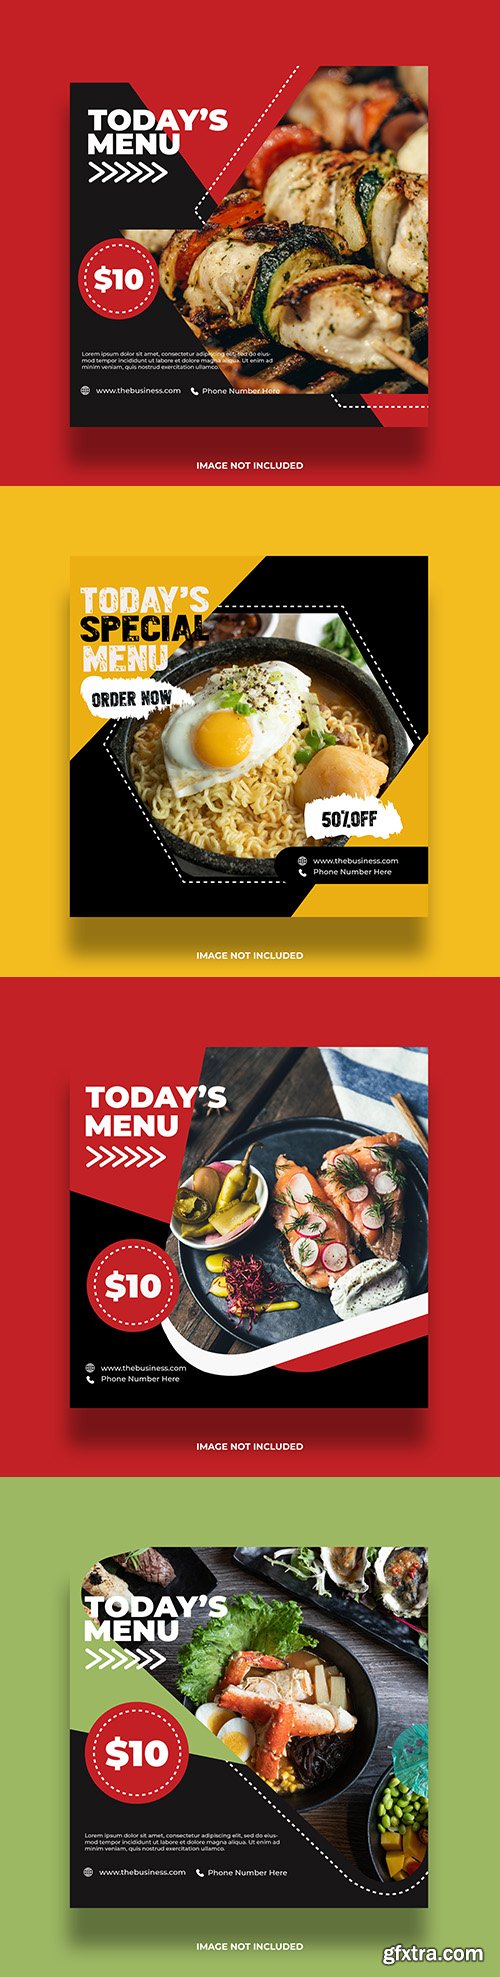 Menu and eating social media promotion template
